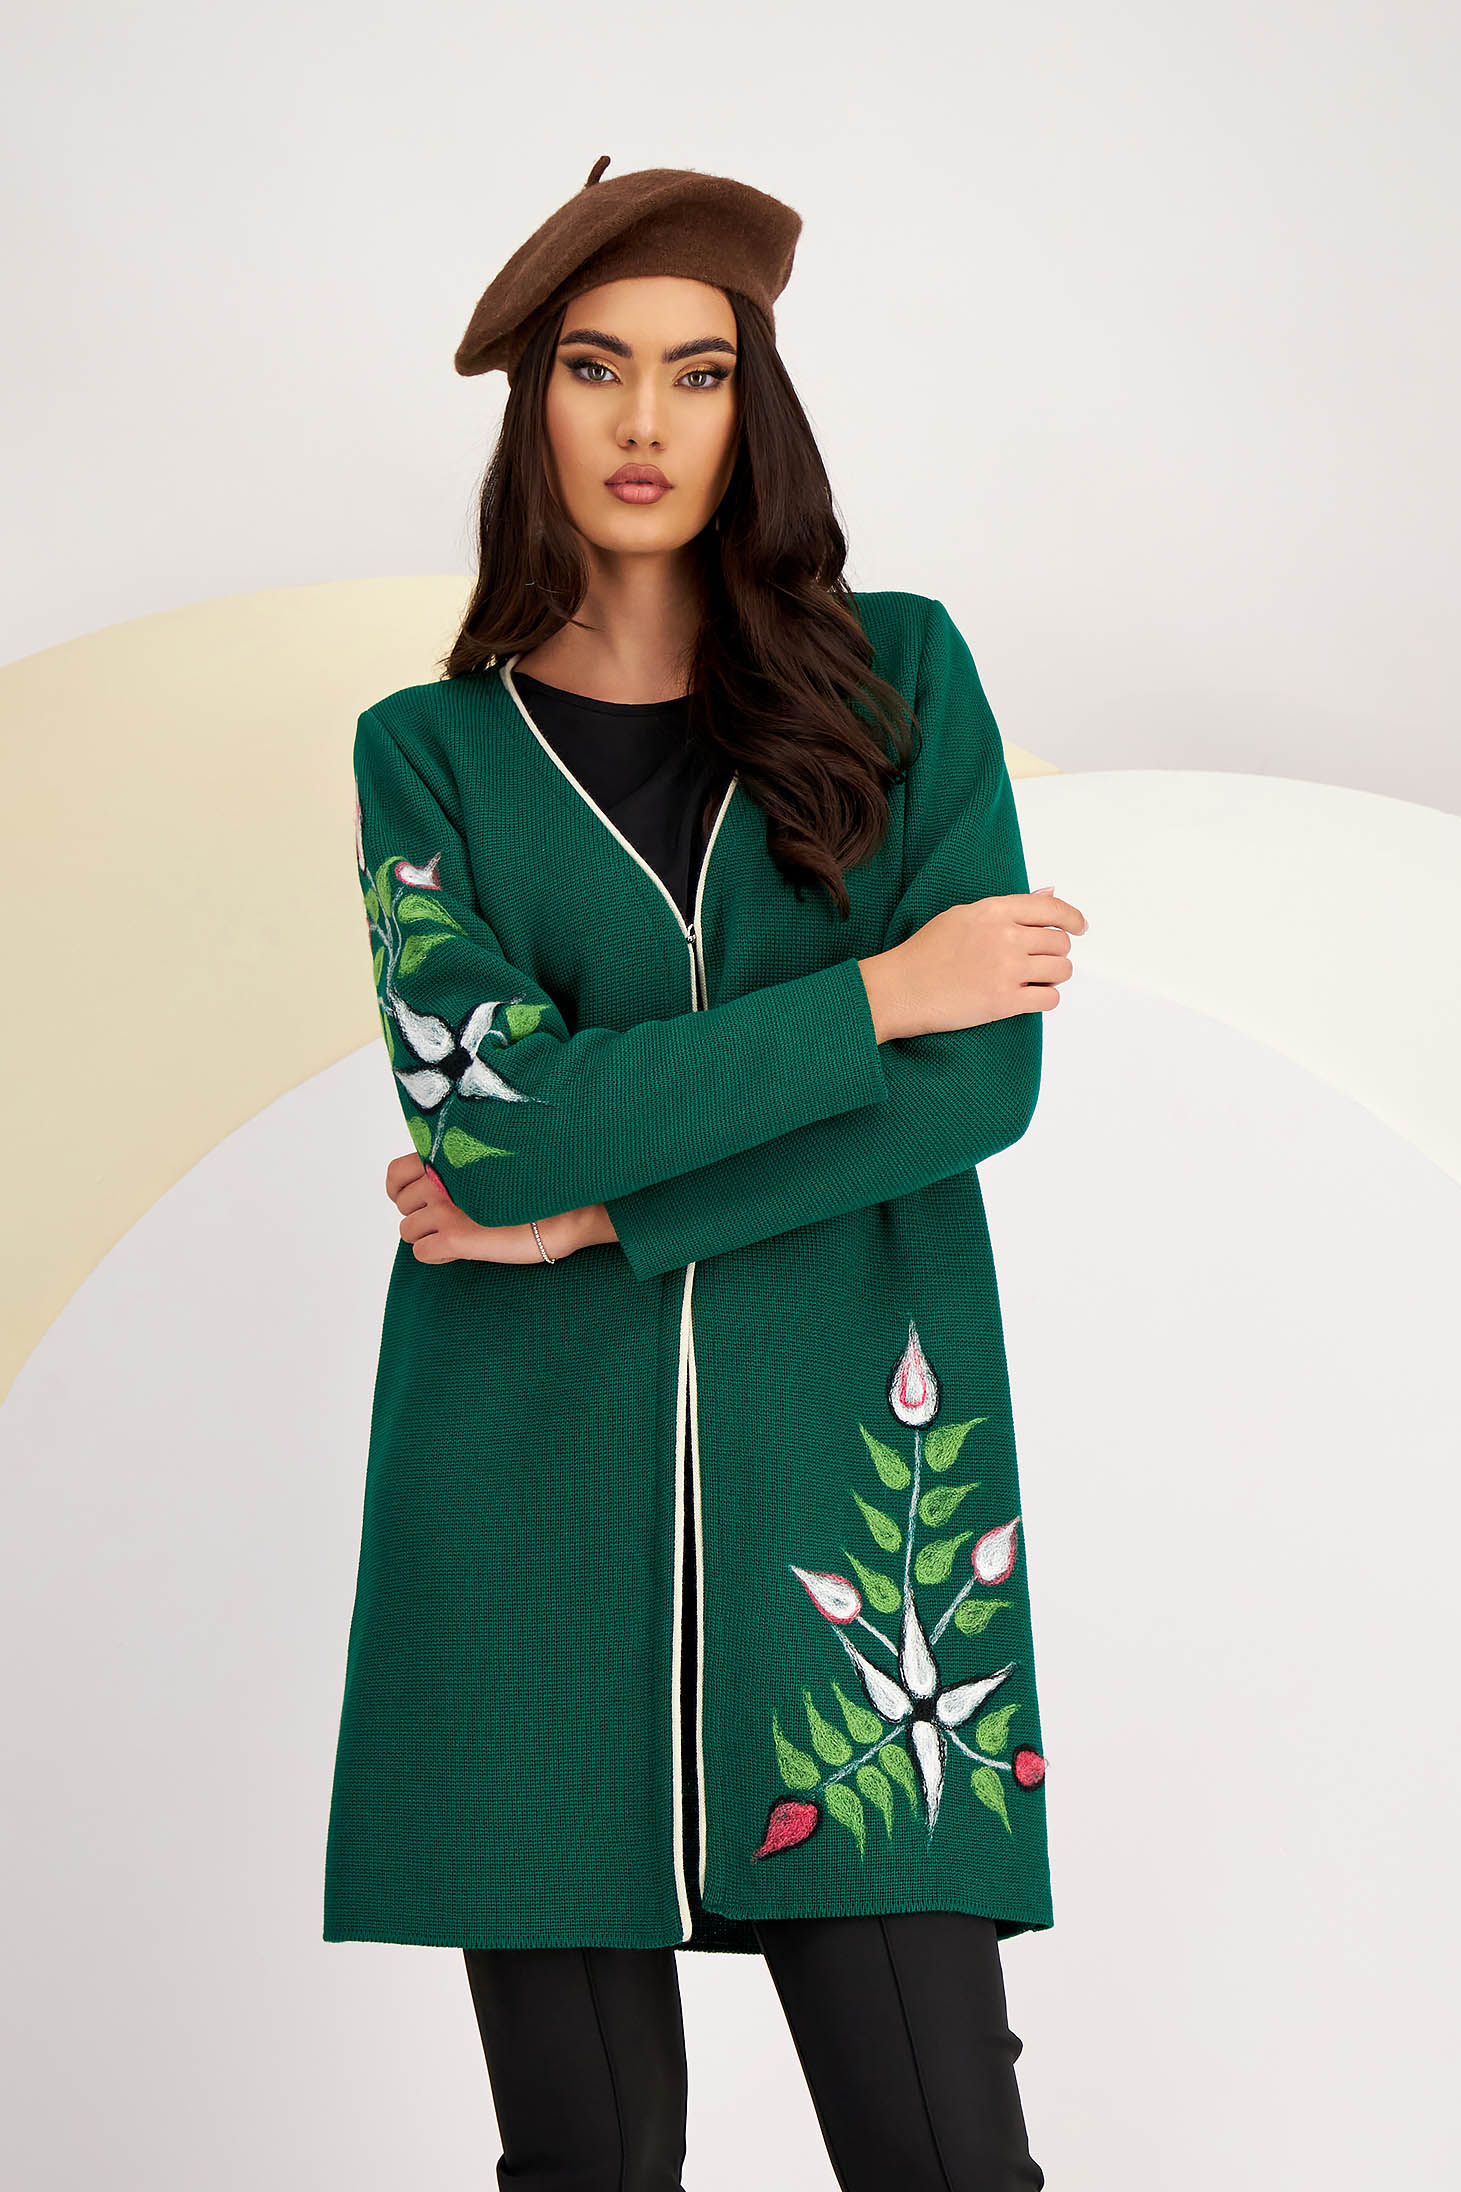 Green knitted cardigan with front closure and floral patterns - Lady Pandora 1 - StarShinerS.com